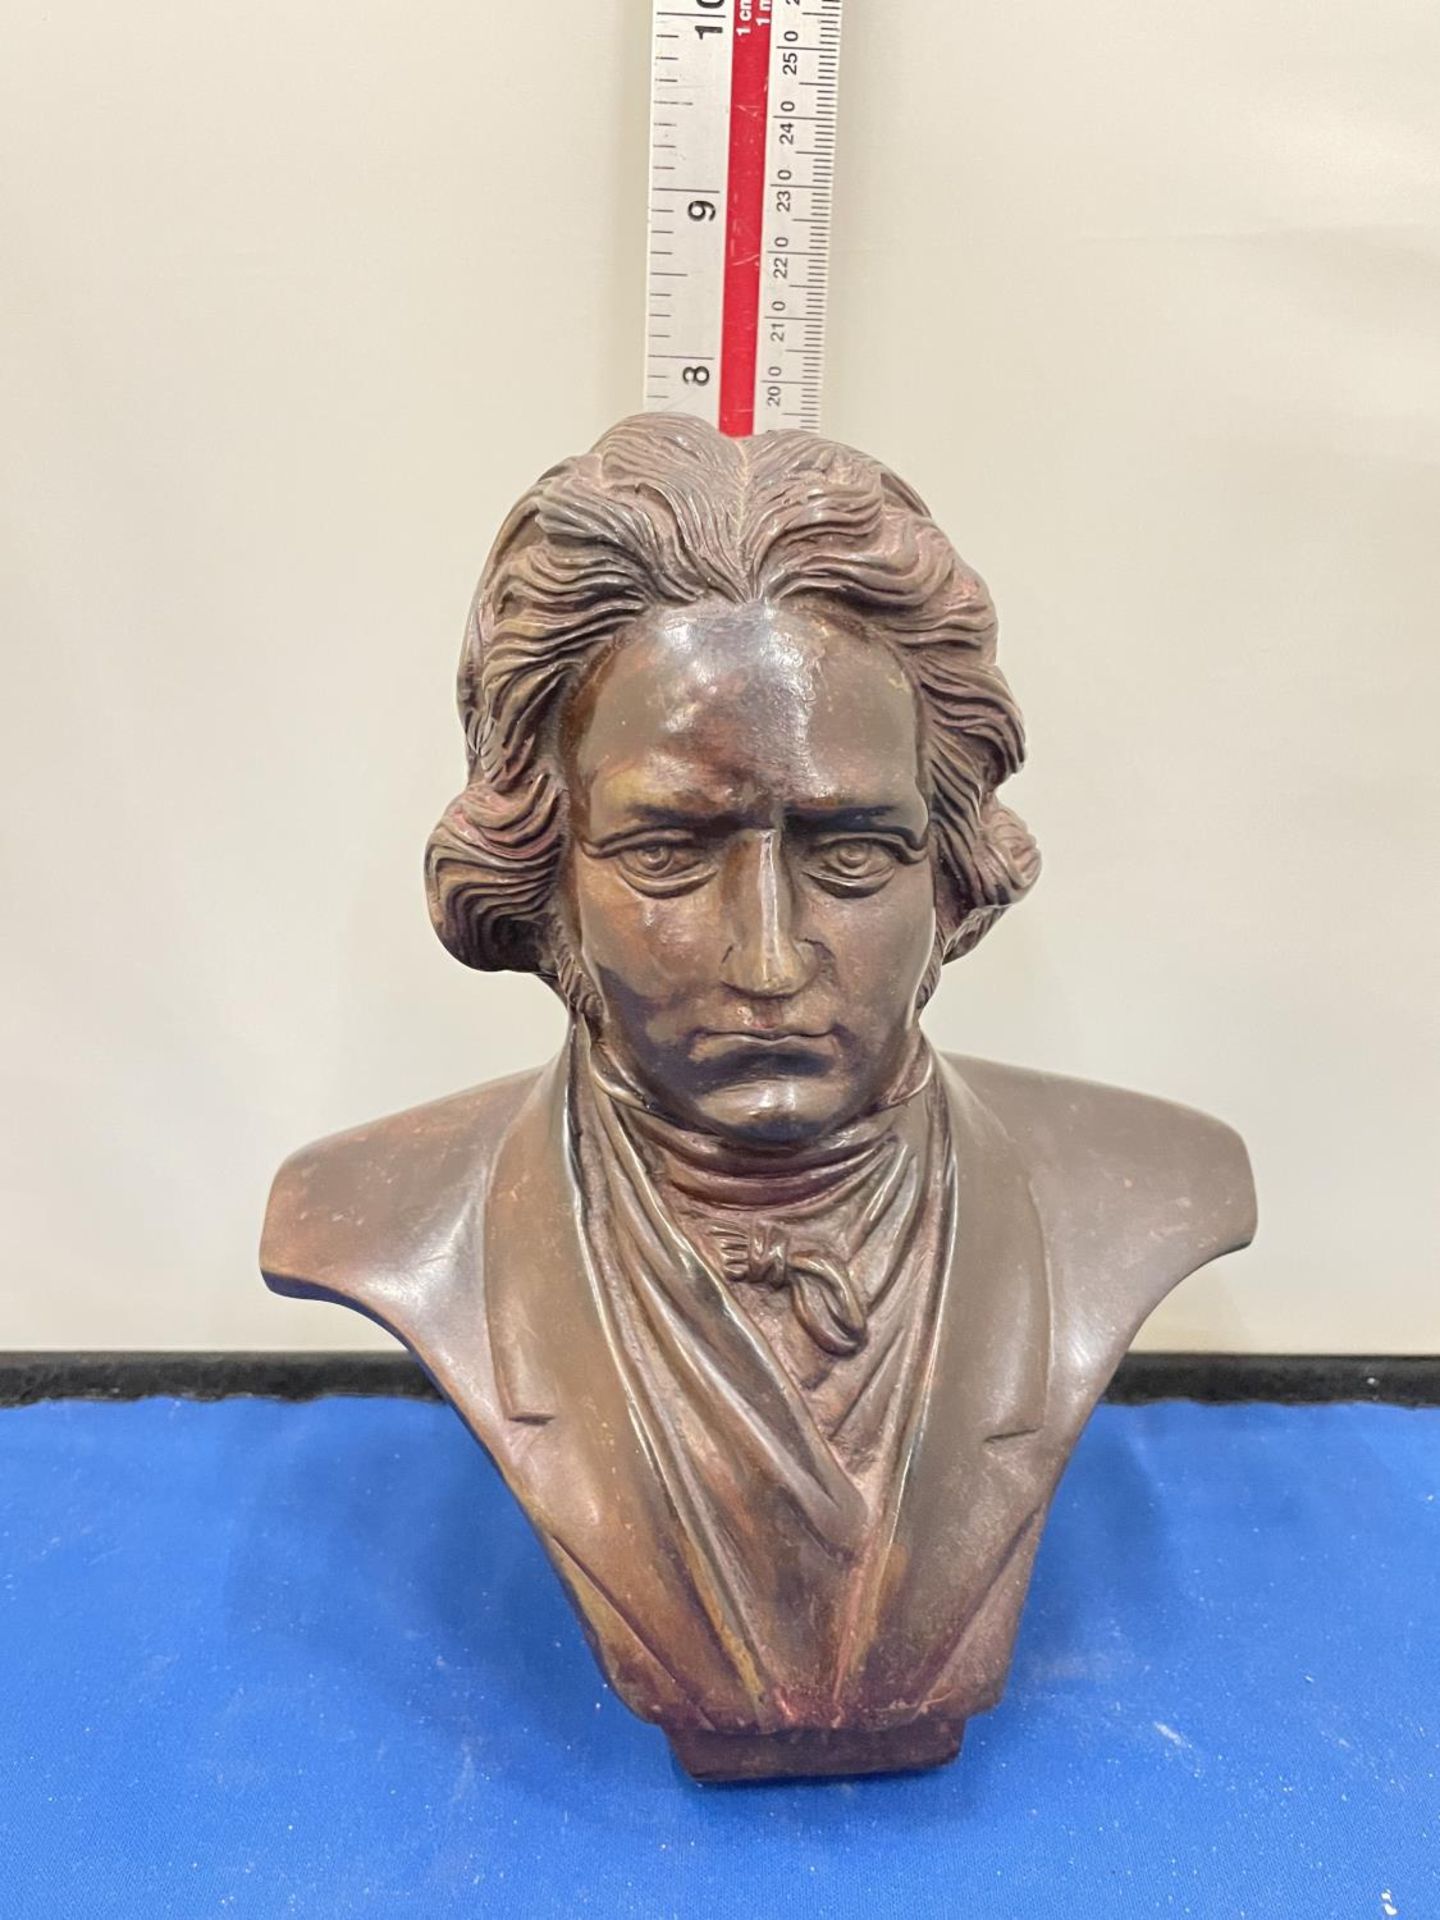 A BRONZE BUST OF BEETHOVEN - Image 8 of 8